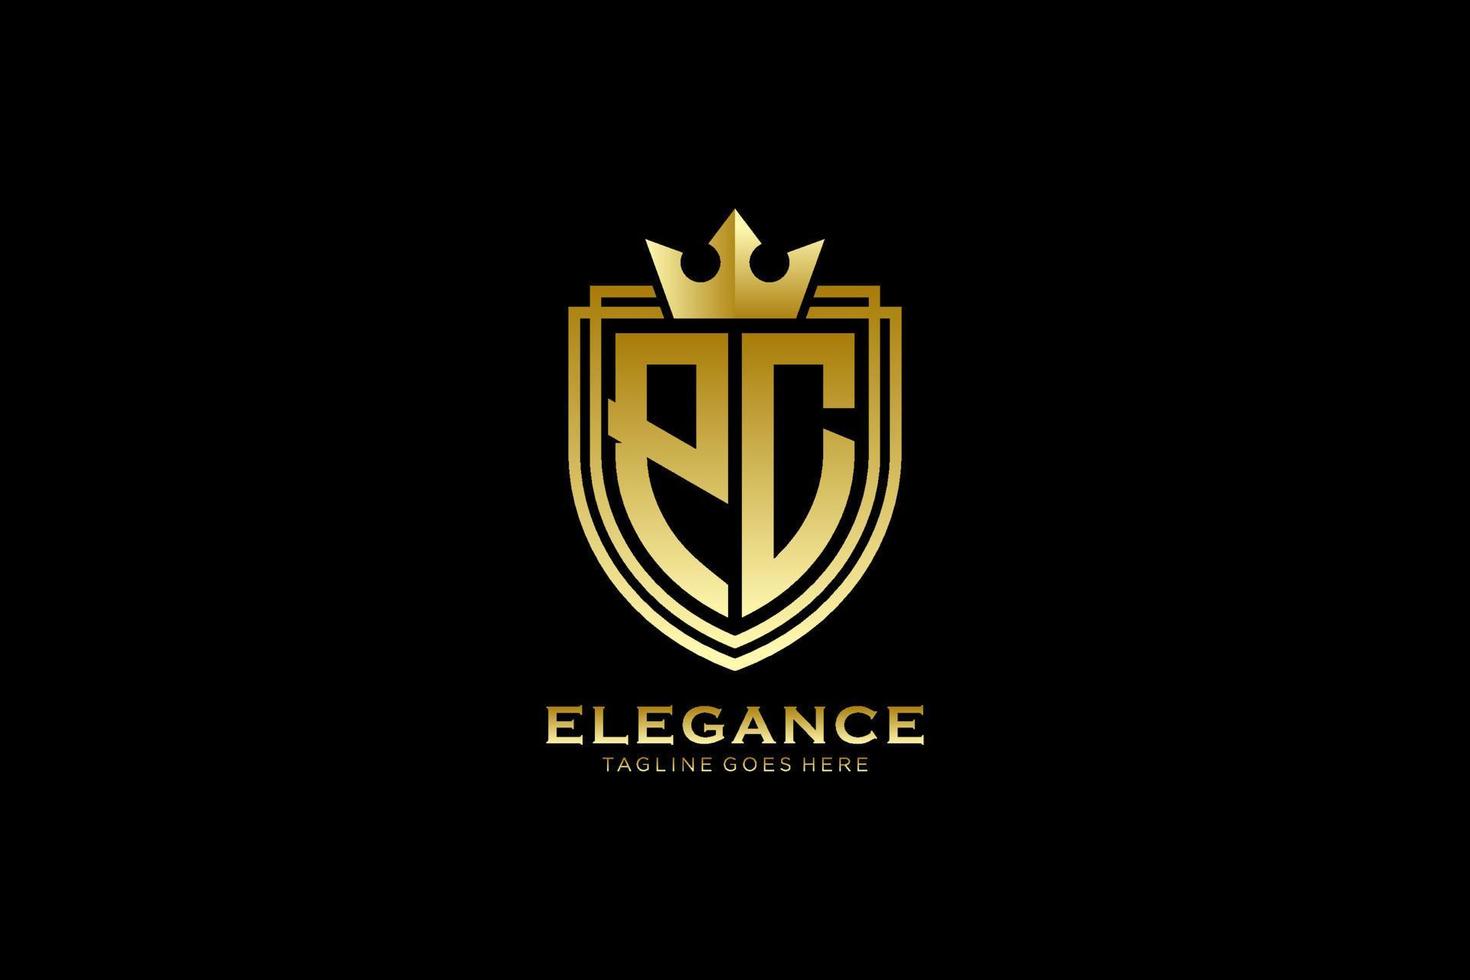 initial PC elegant luxury monogram logo or badge template with scrolls and royal crown - perfect for luxurious branding projects vector